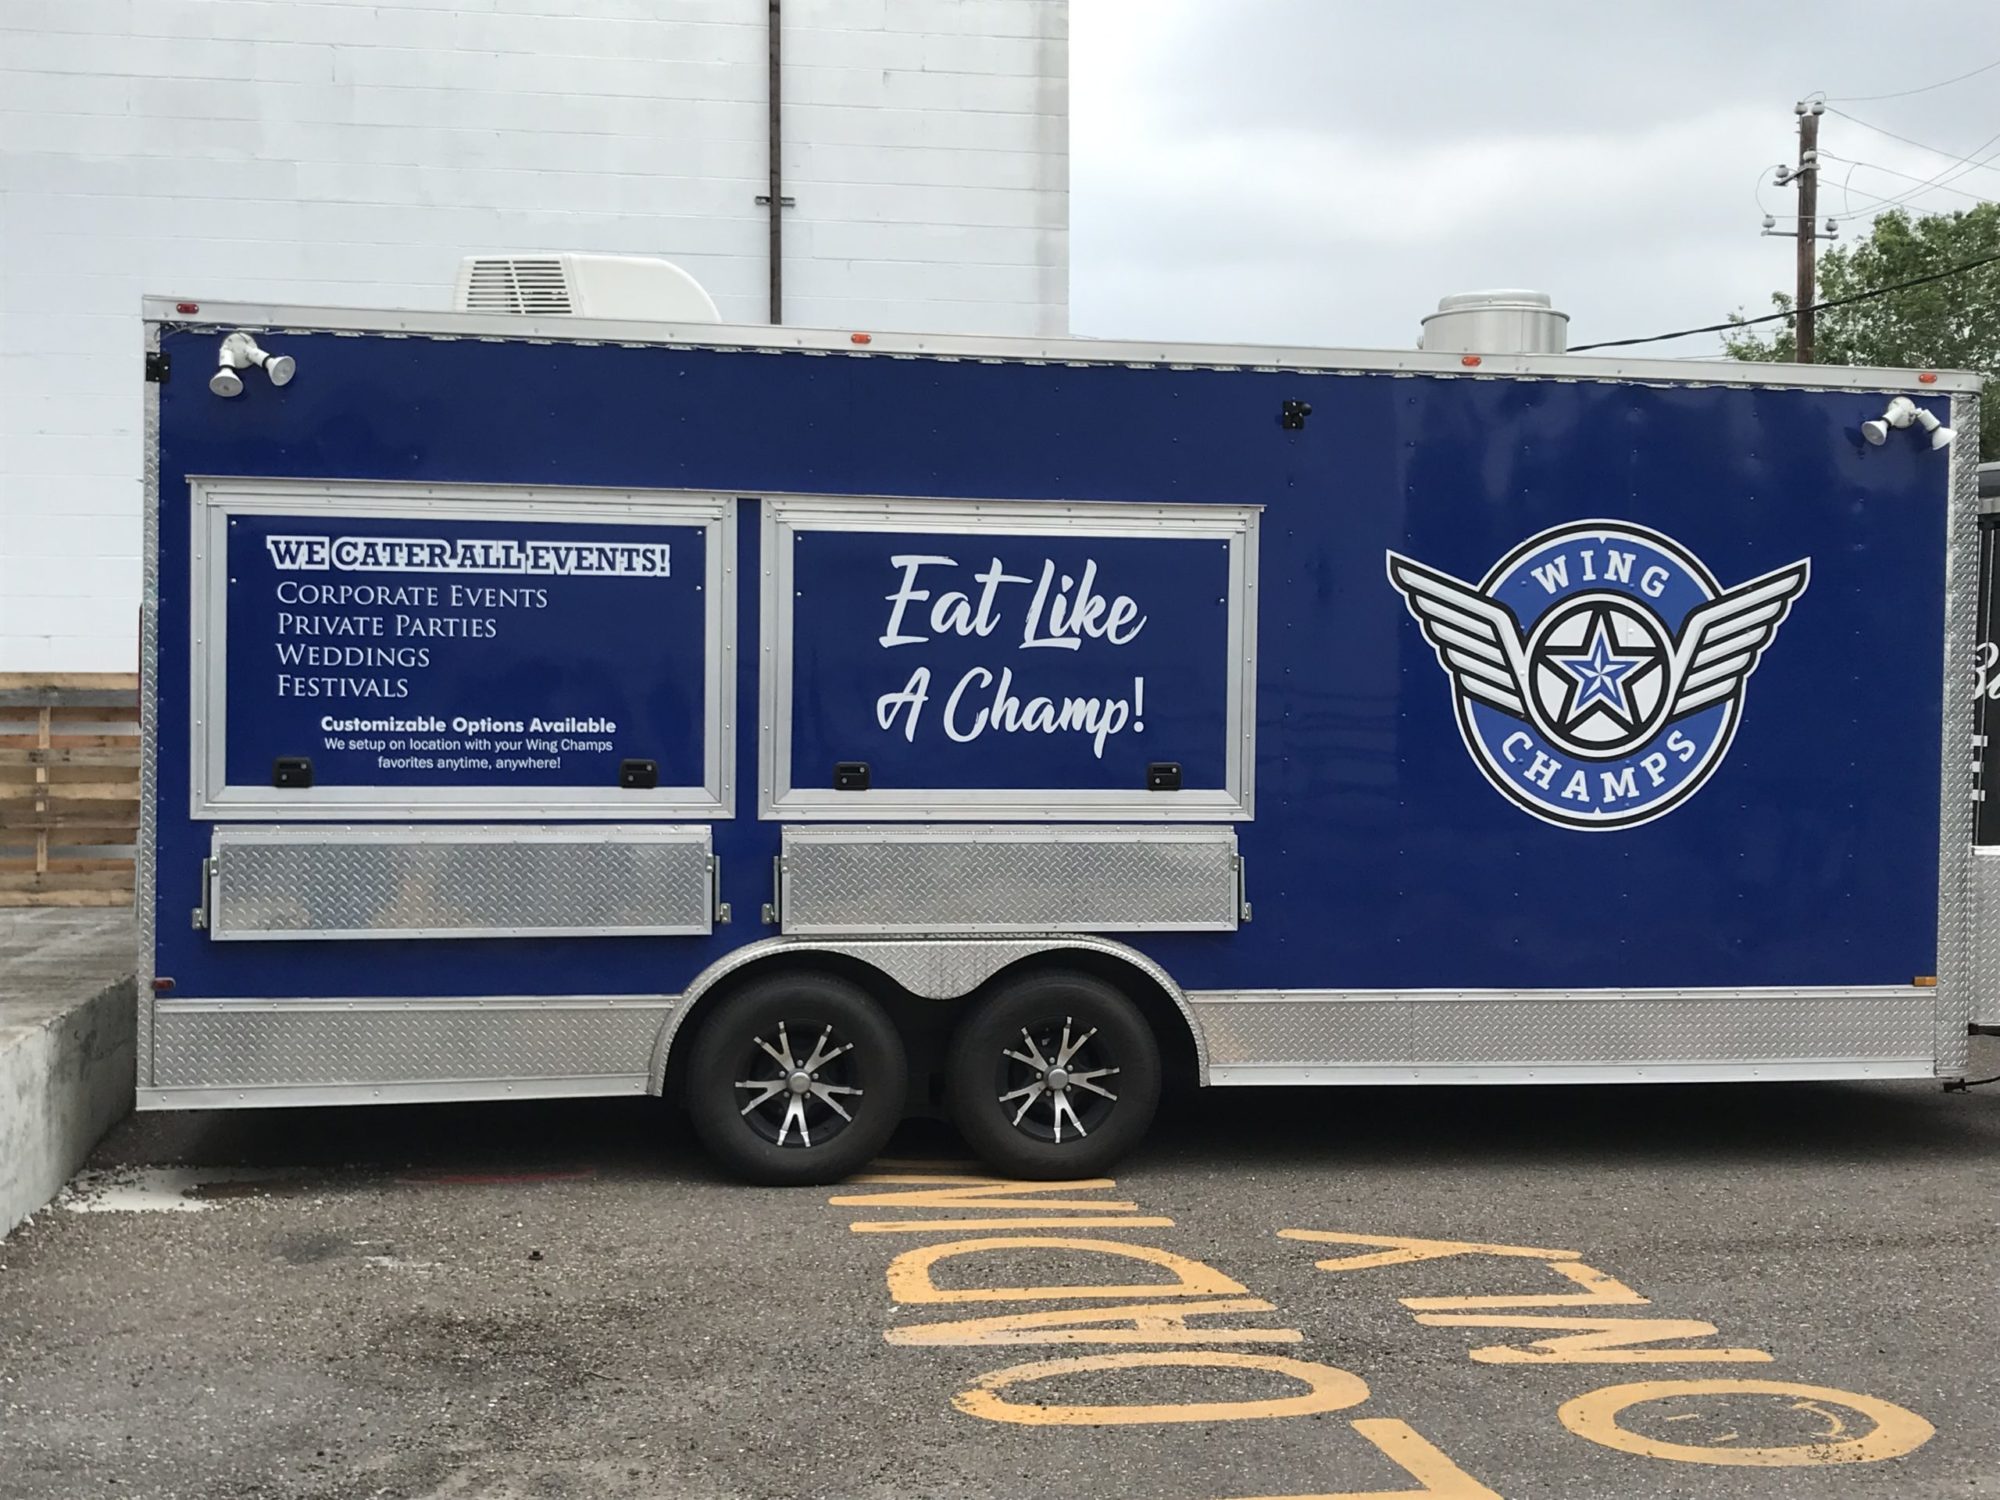 Food truck for Wing Champs